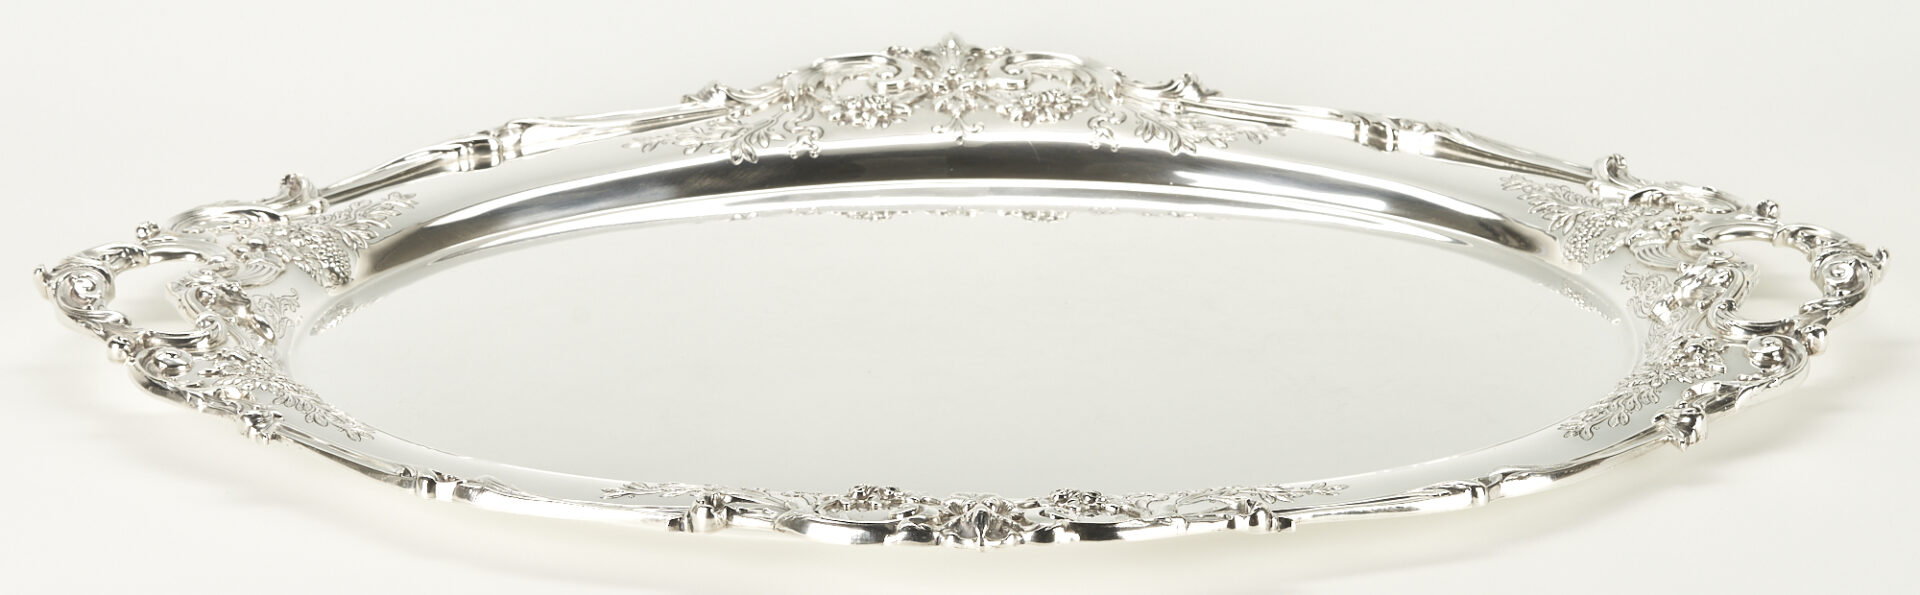 Lot 57: Large Reed & Barton Sterling Silver Francis I Waiter Tray